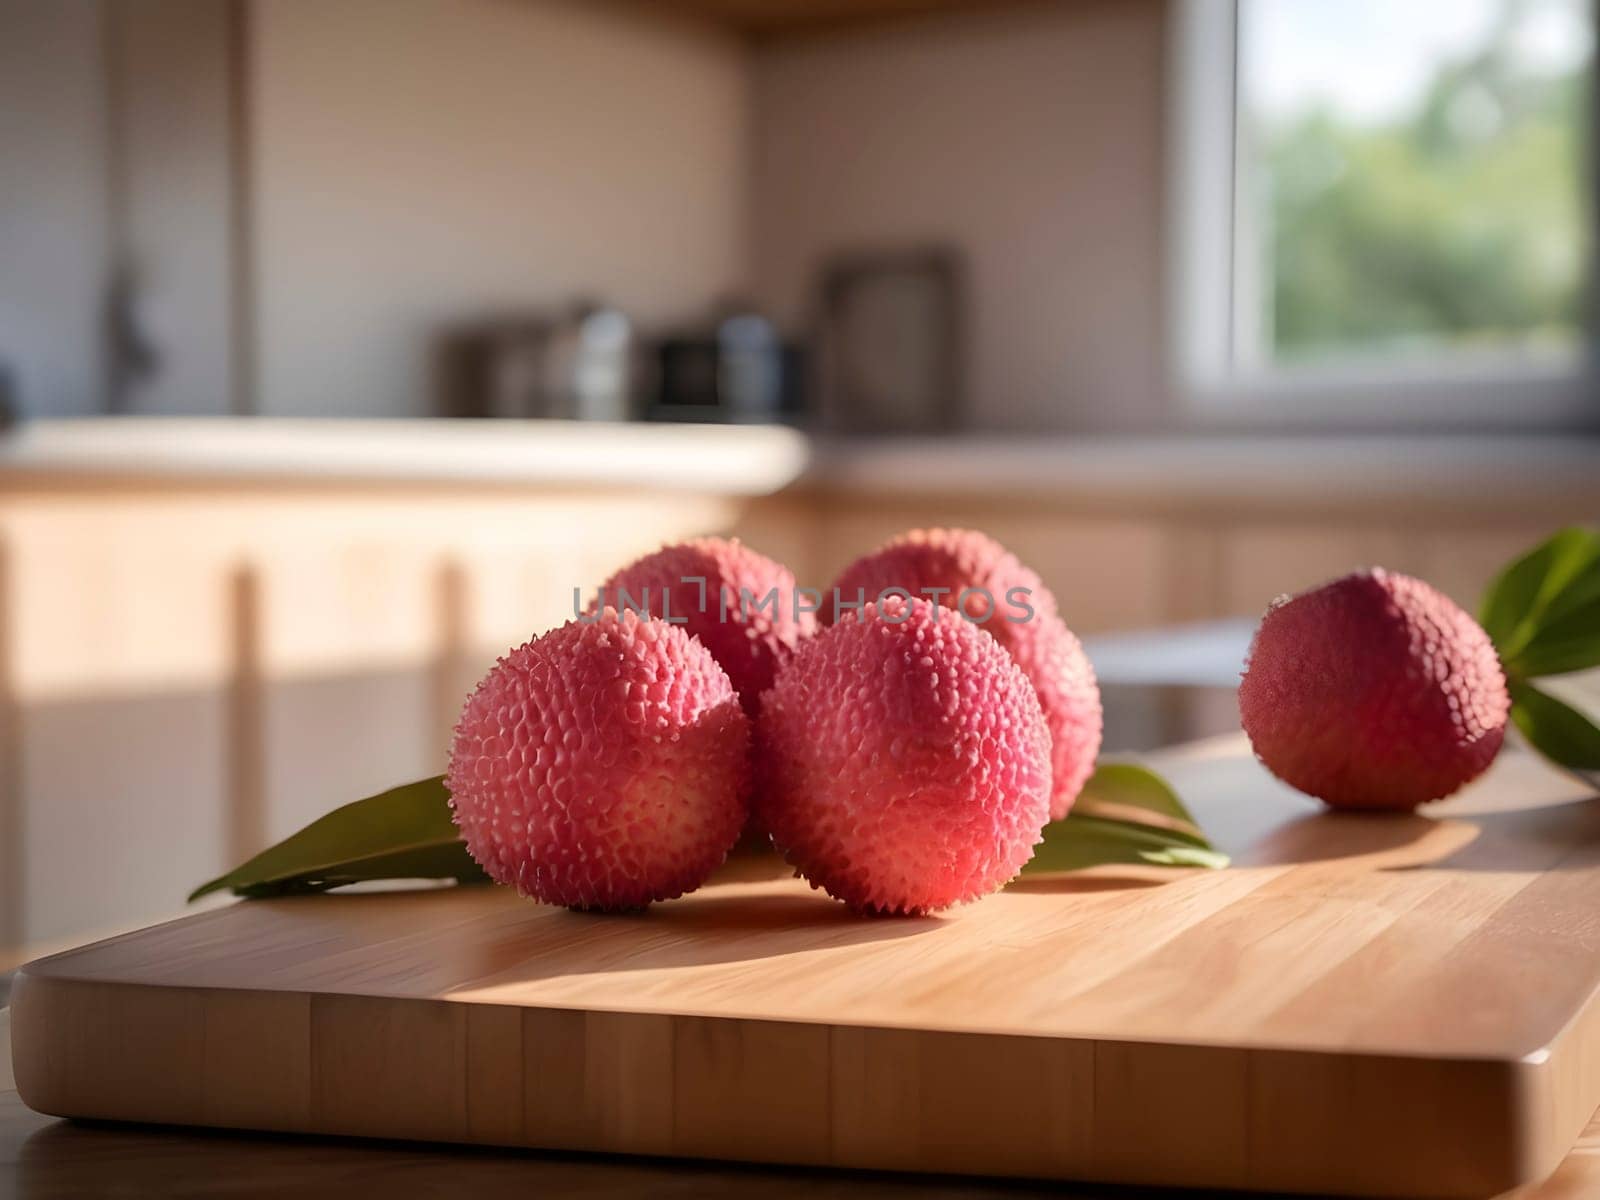 Kitchen Harmony: Lychee Perfection Bathed in Afternoon Sunlight by mailos